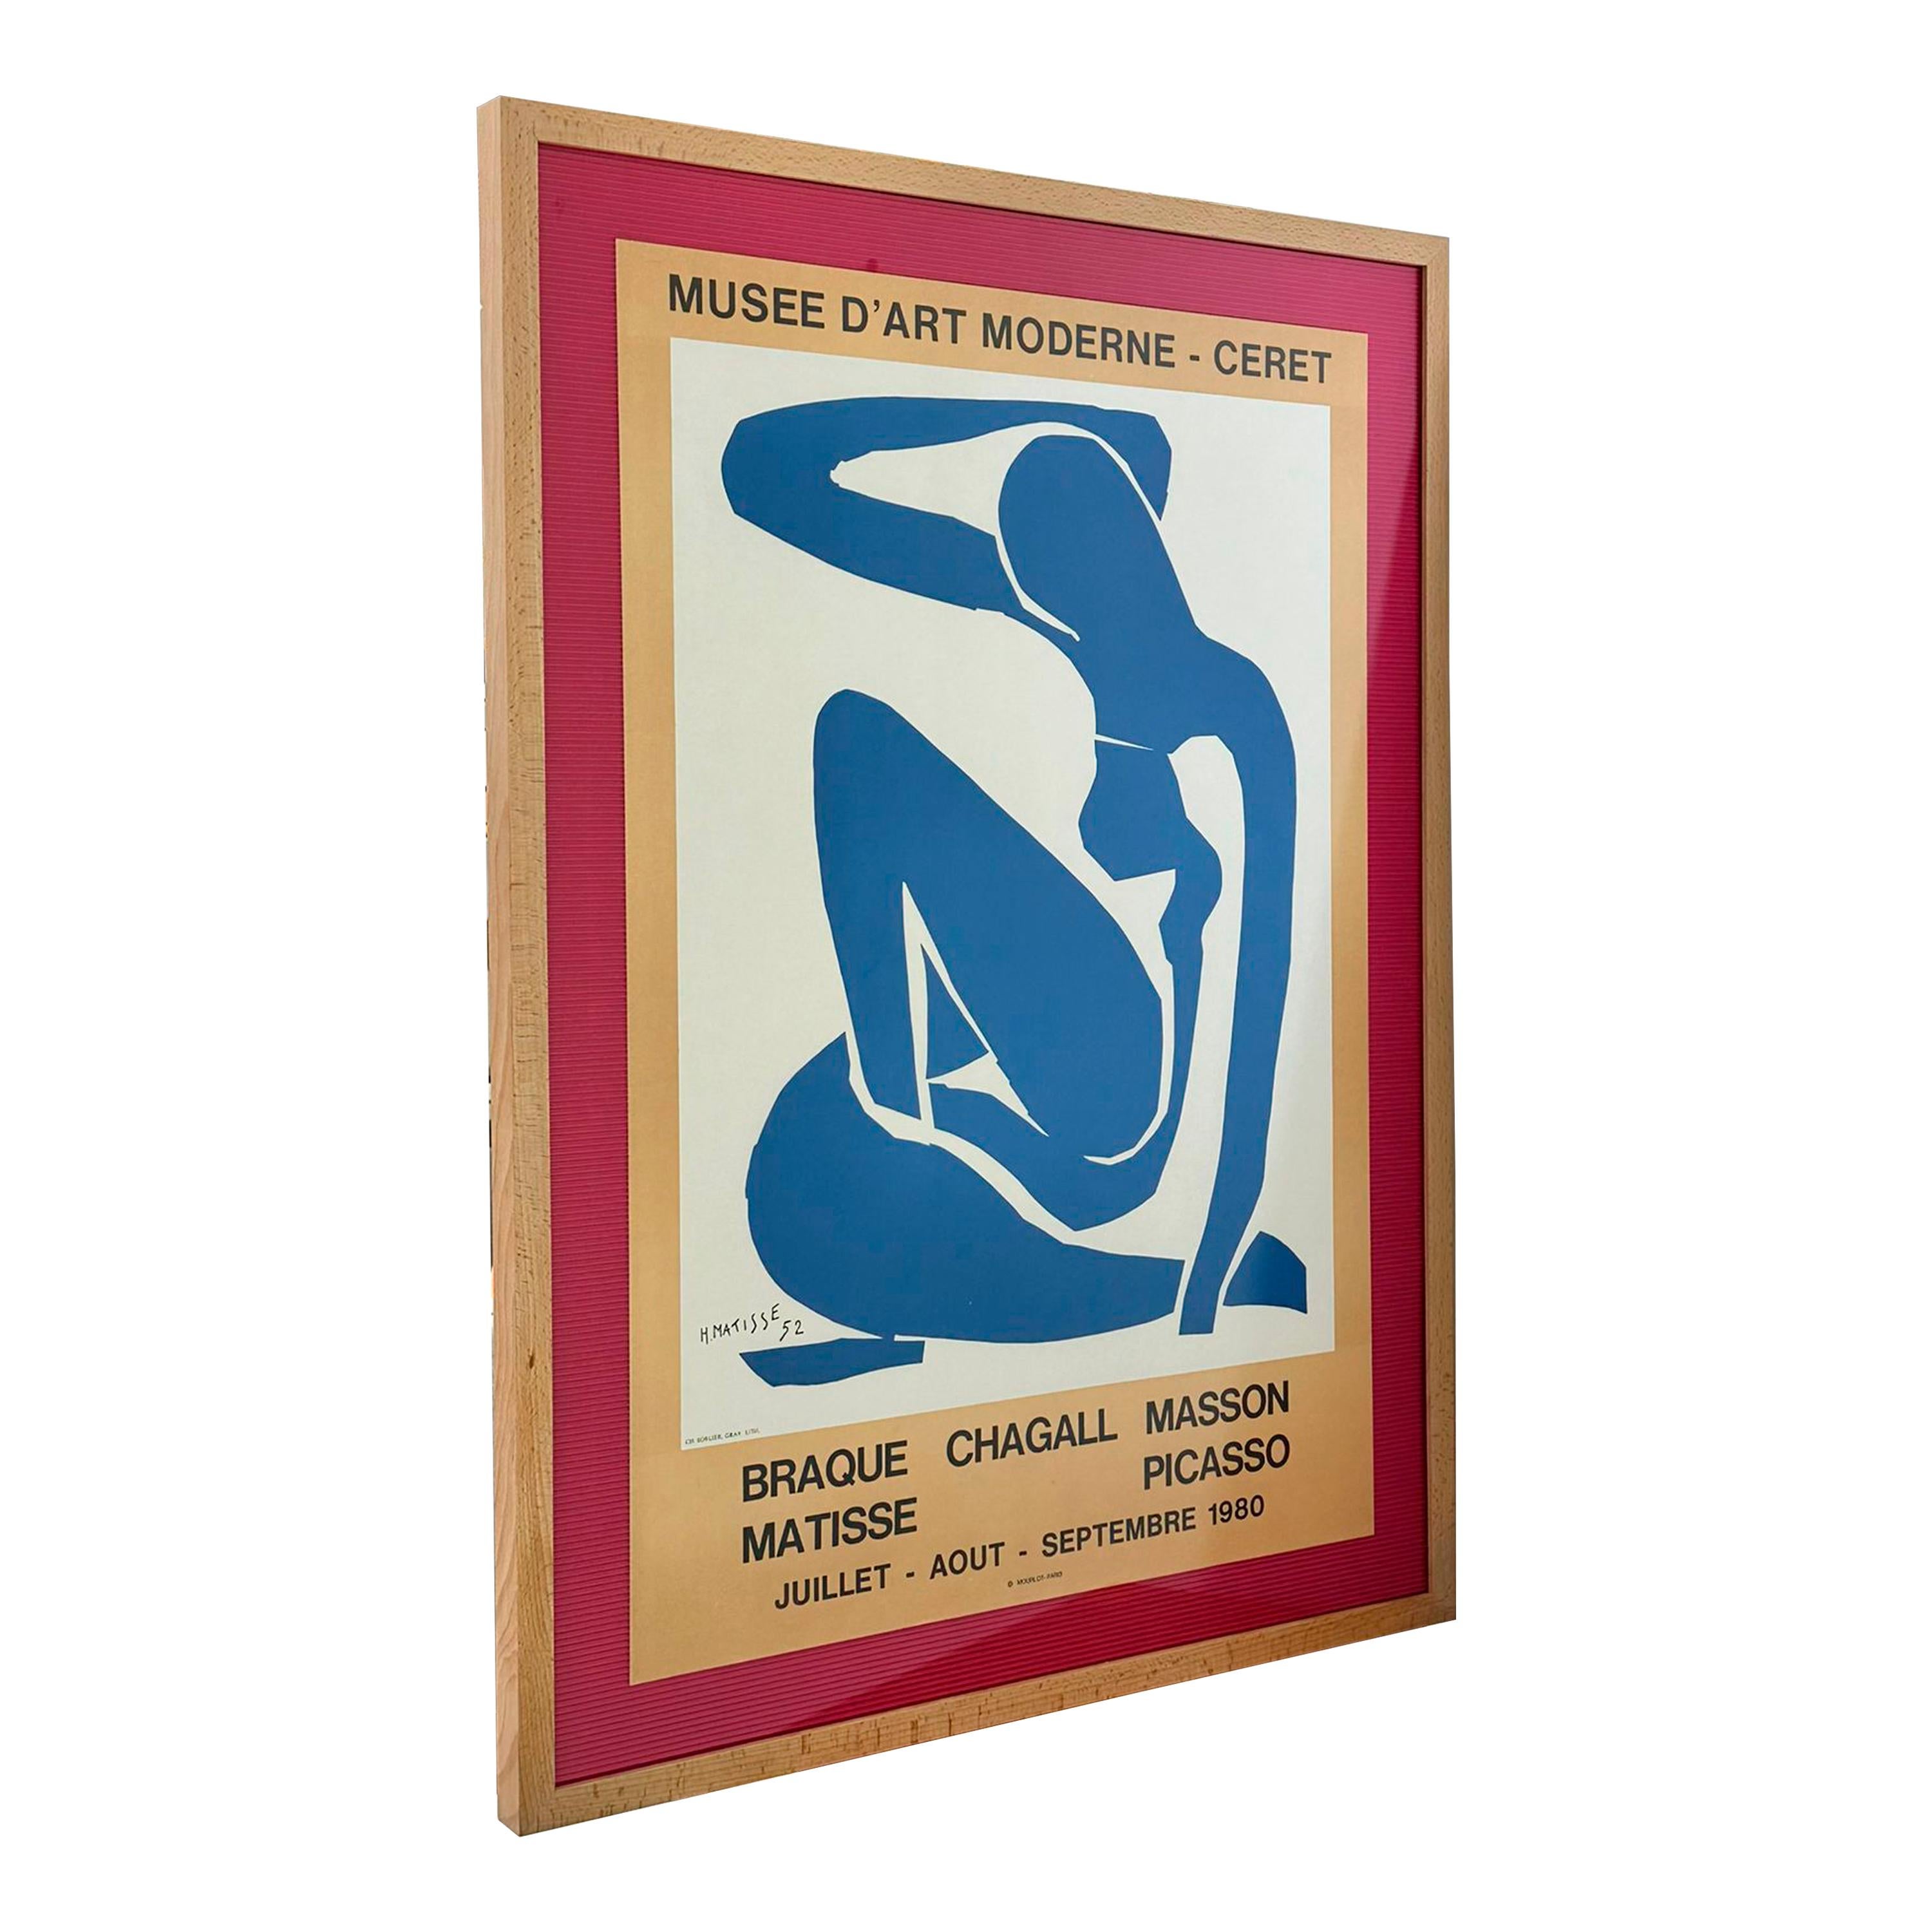 French Lithograph Poster of Henri Matisse, for Museum of Modern Art Ceret France, 1980